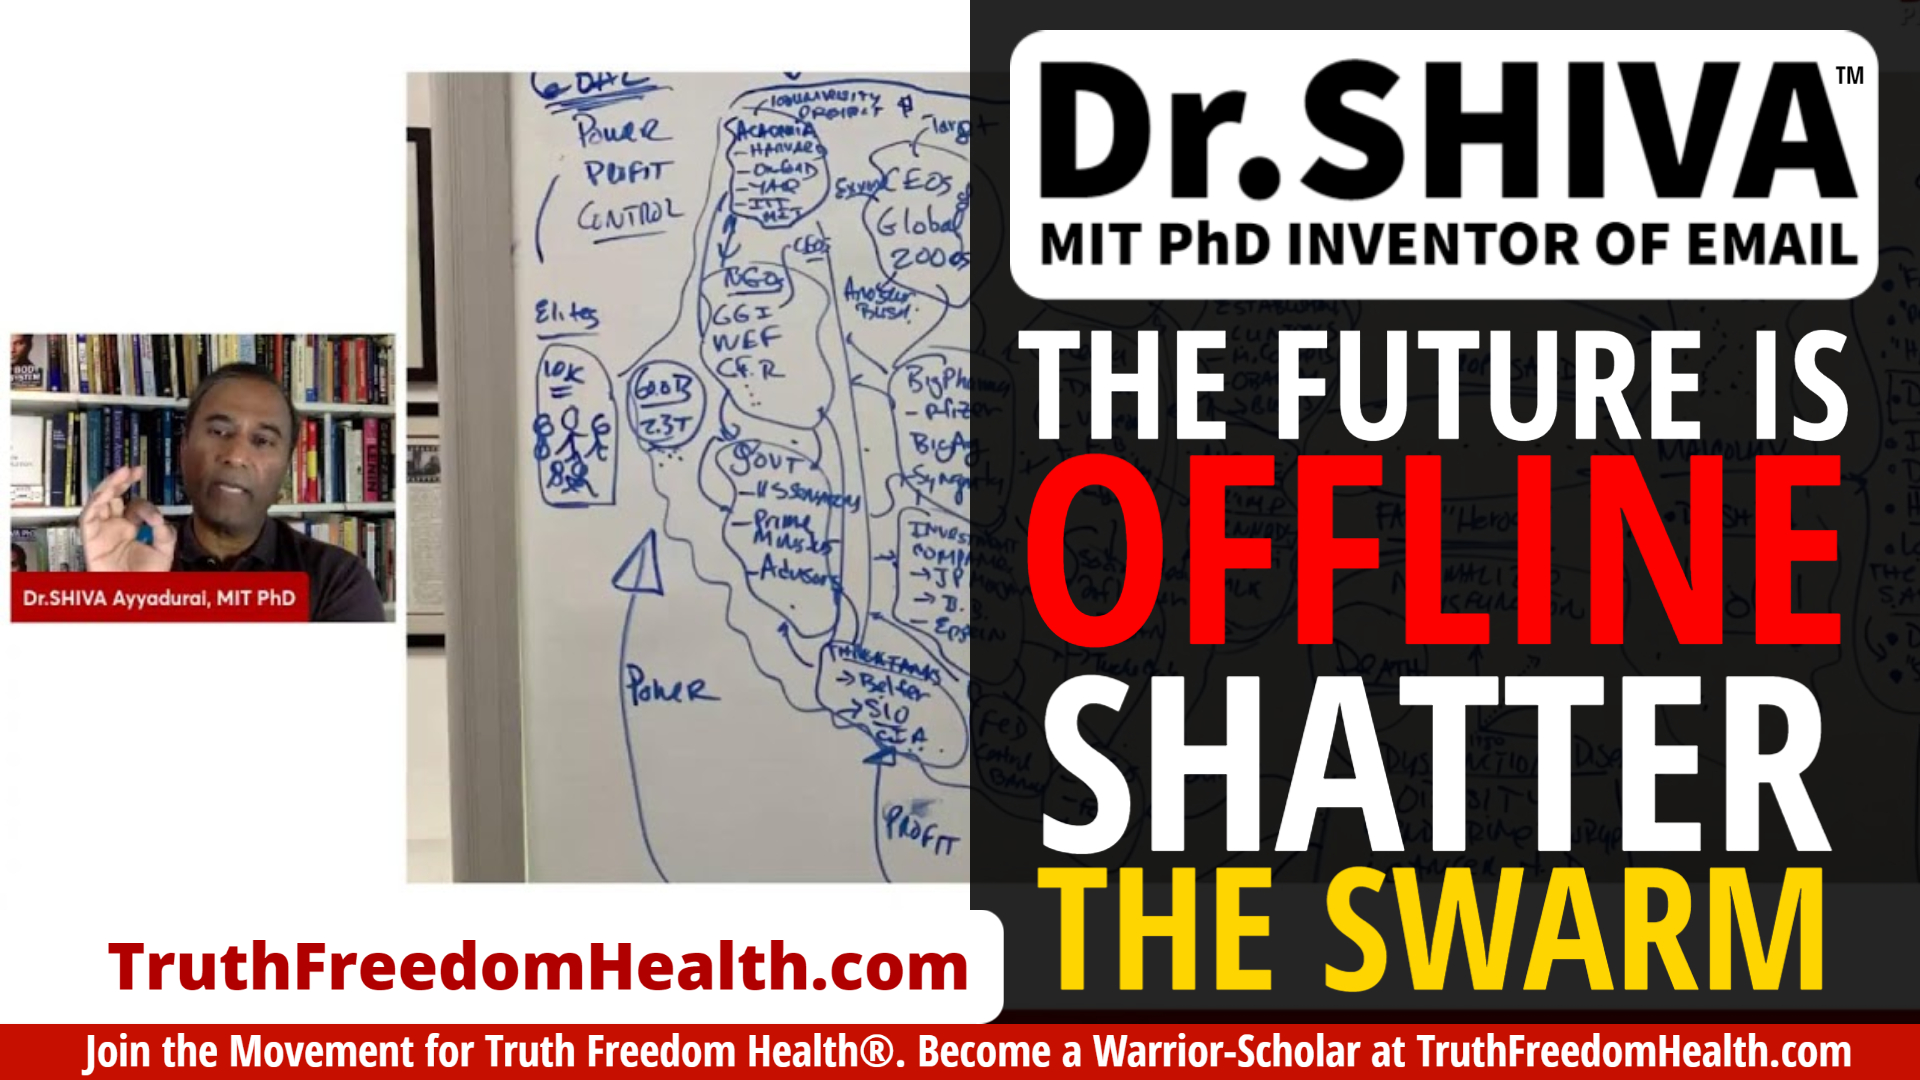 Dr-SHIVA LIVE_ The Future is Off-Line- Shatter the SWARM! Shiva4President-com